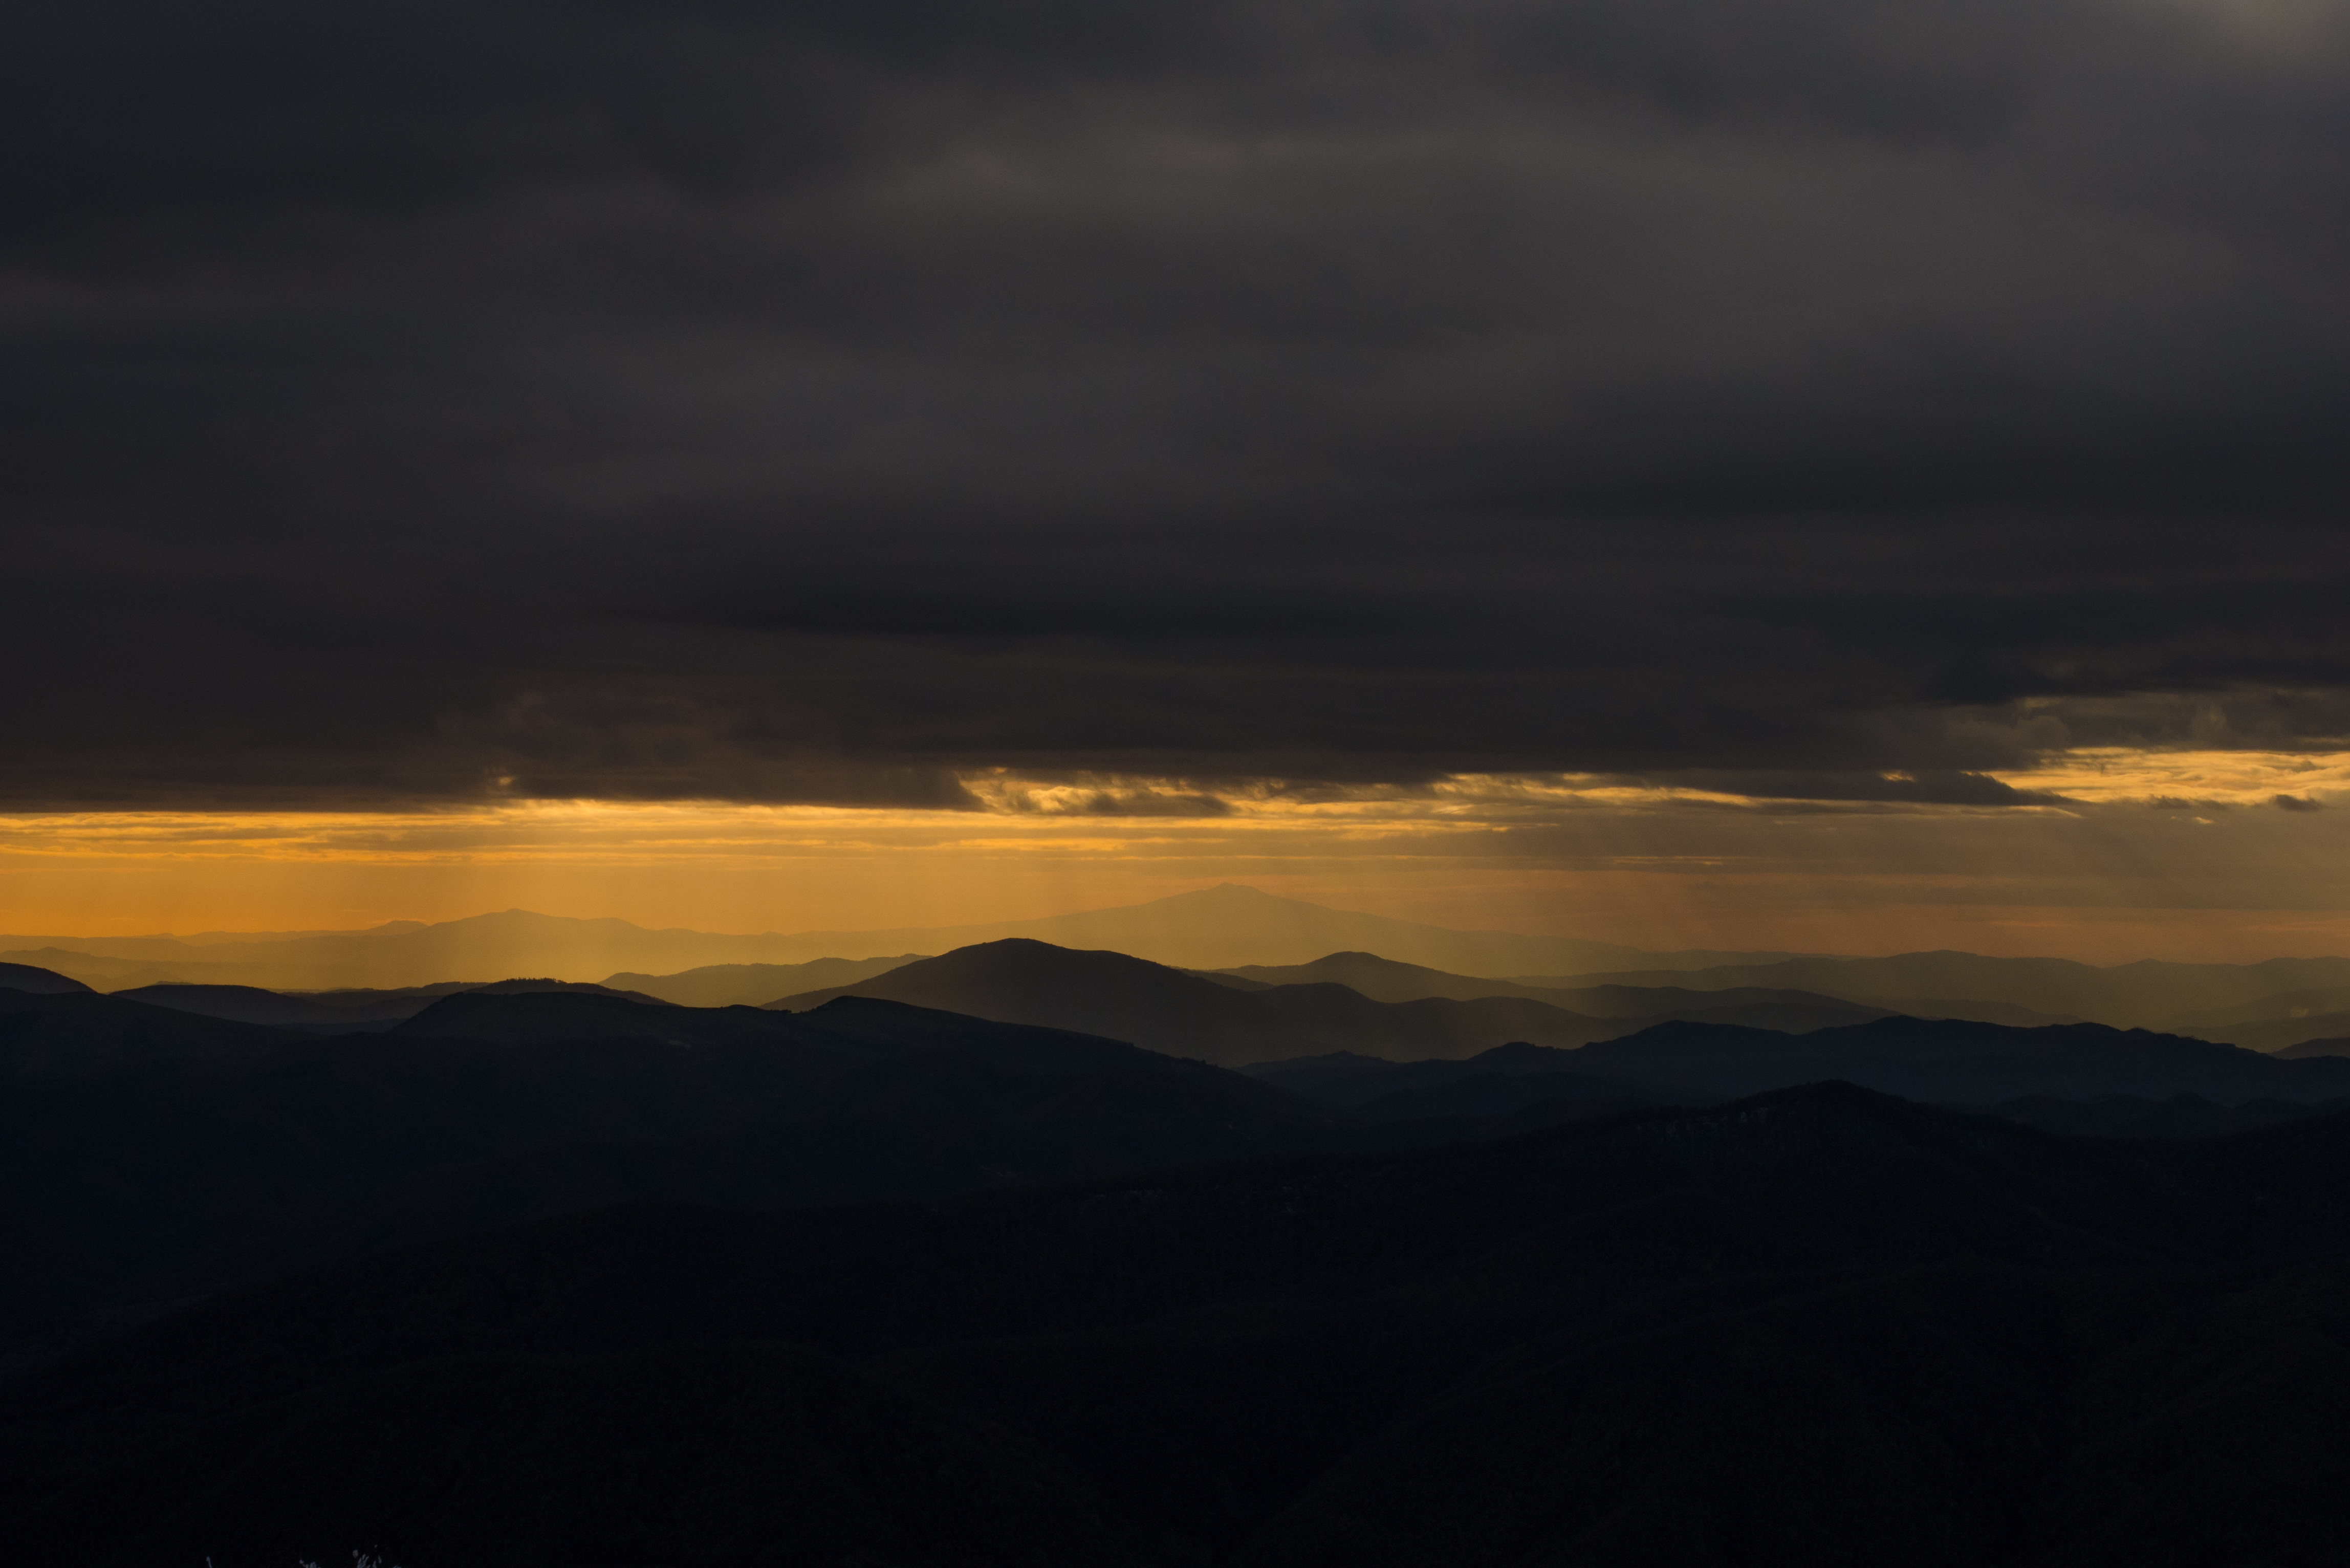 dark, mainly cloudy, nature, mountains, night, clouds, horizon, overcast High Definition image